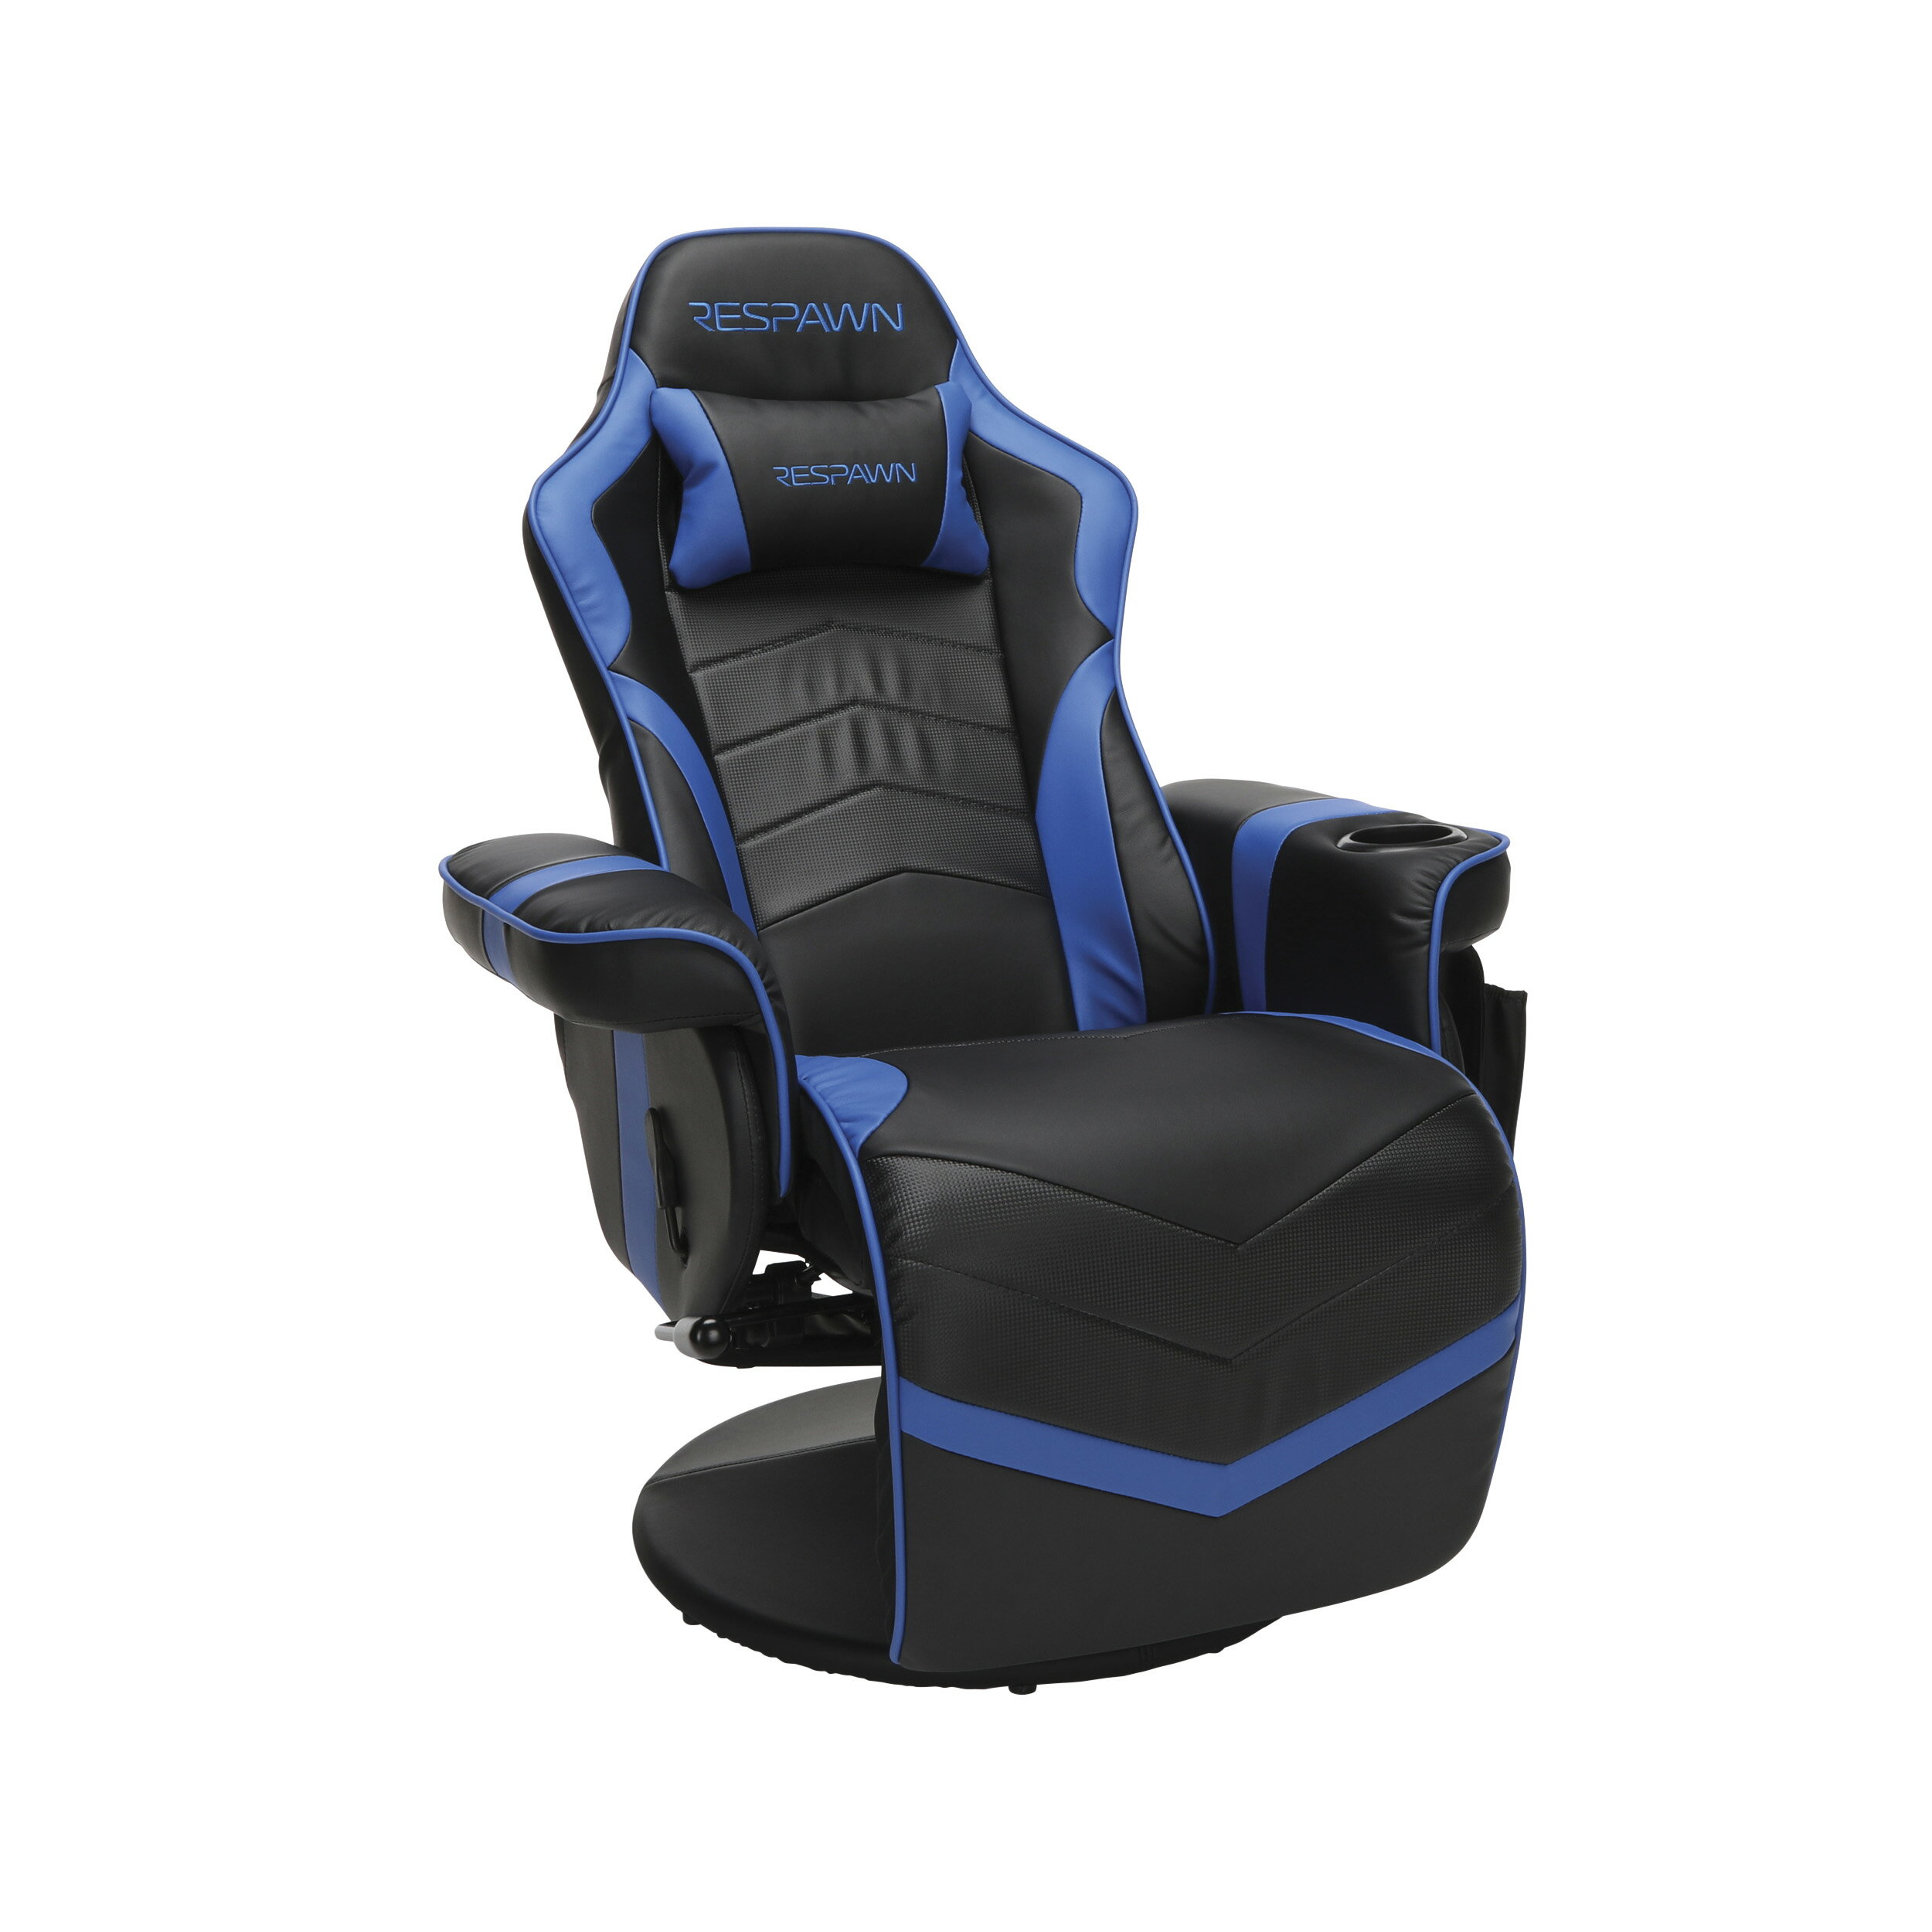 RESPAWN-900 Racing Style Gaming Recliner, Reclining Gaming Chair, in